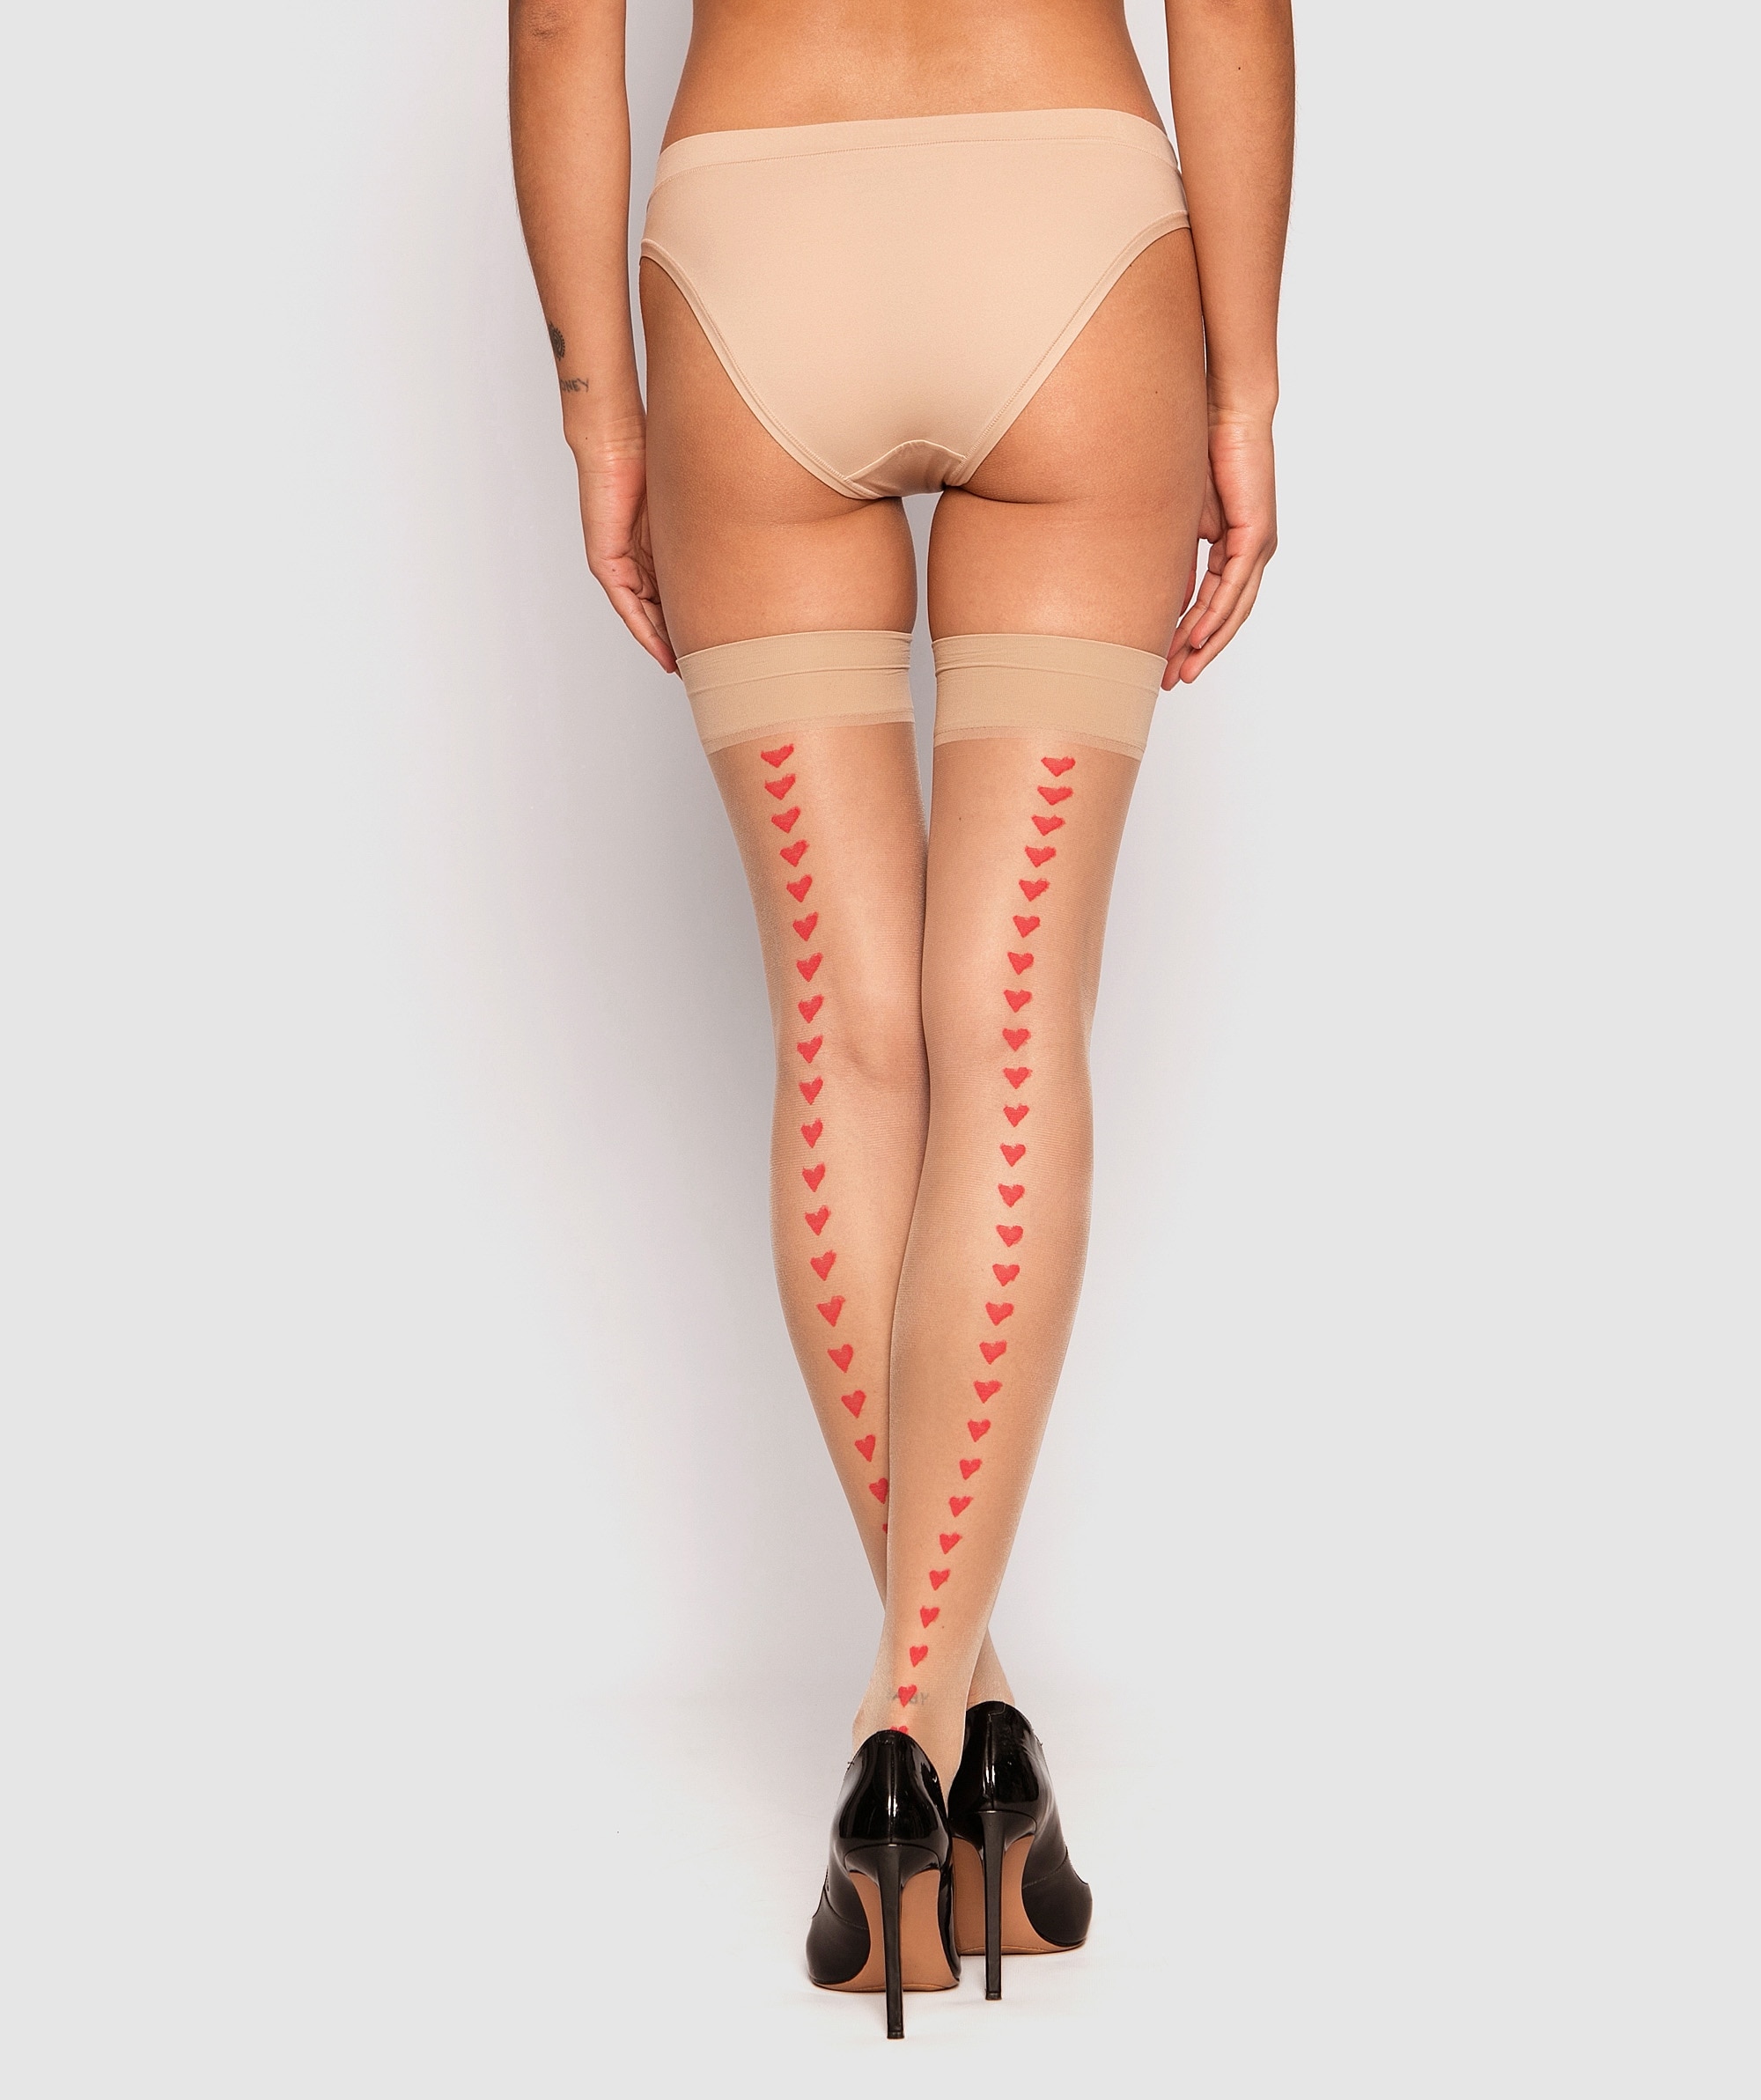 Heart Smooth Top Stay Up Stockings - Nude/Red